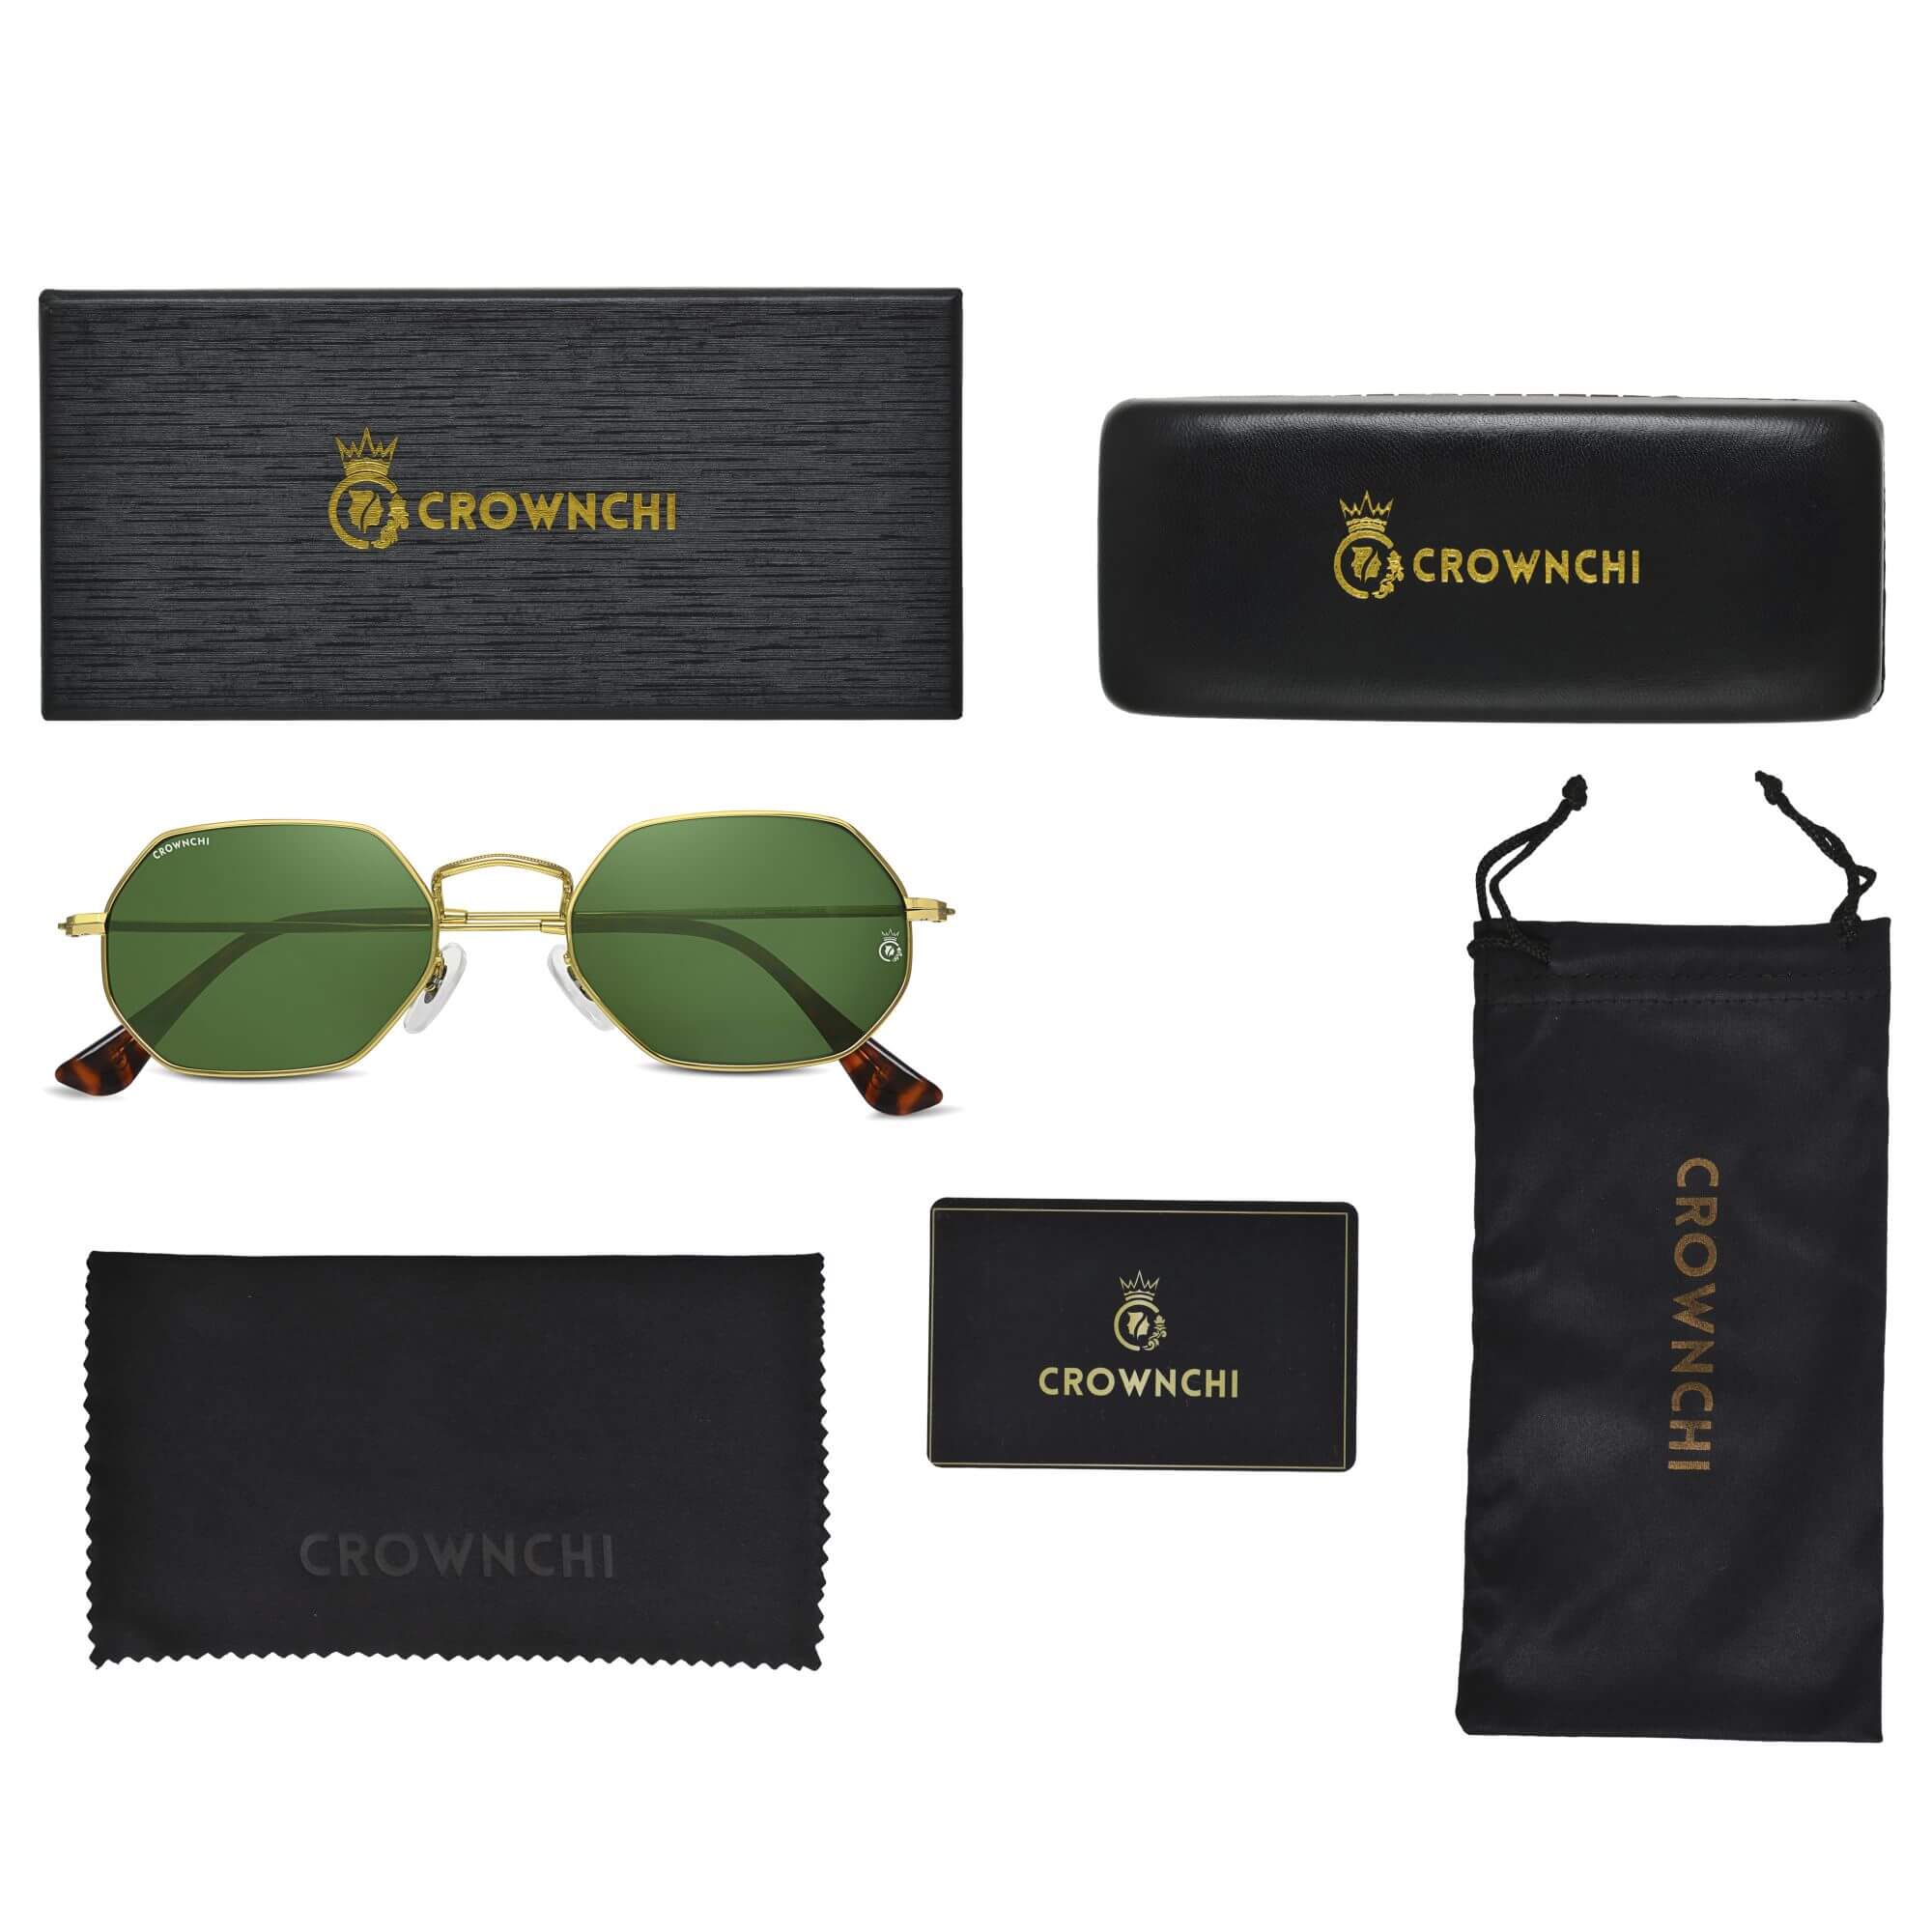 Marcus Gold Green Rectangle Edition Sunglasses